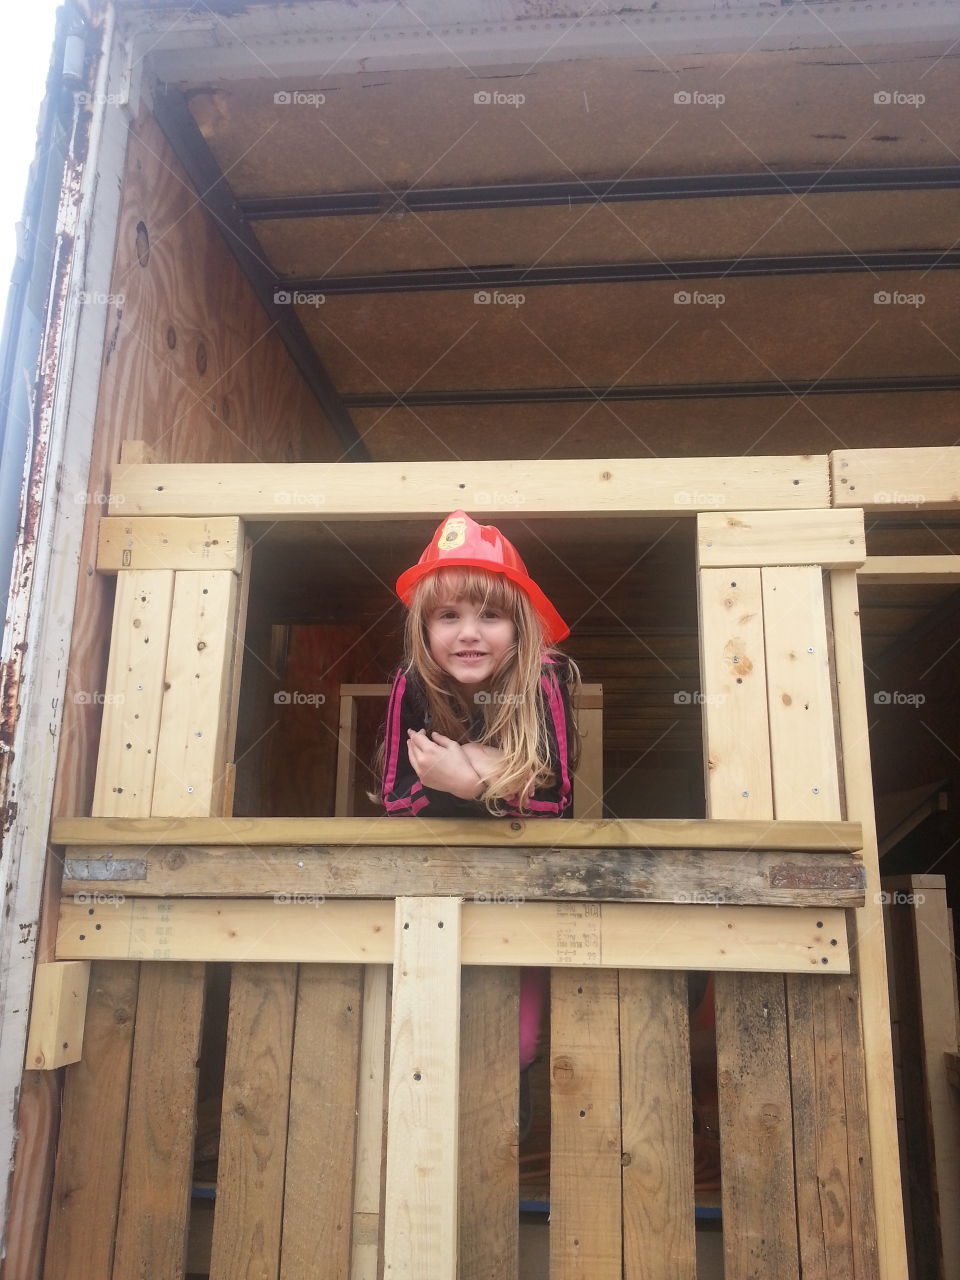 future fire fighter. My daughter in a local training area for fire fighters.  She wants to be a fire fighter just like her daddy. 